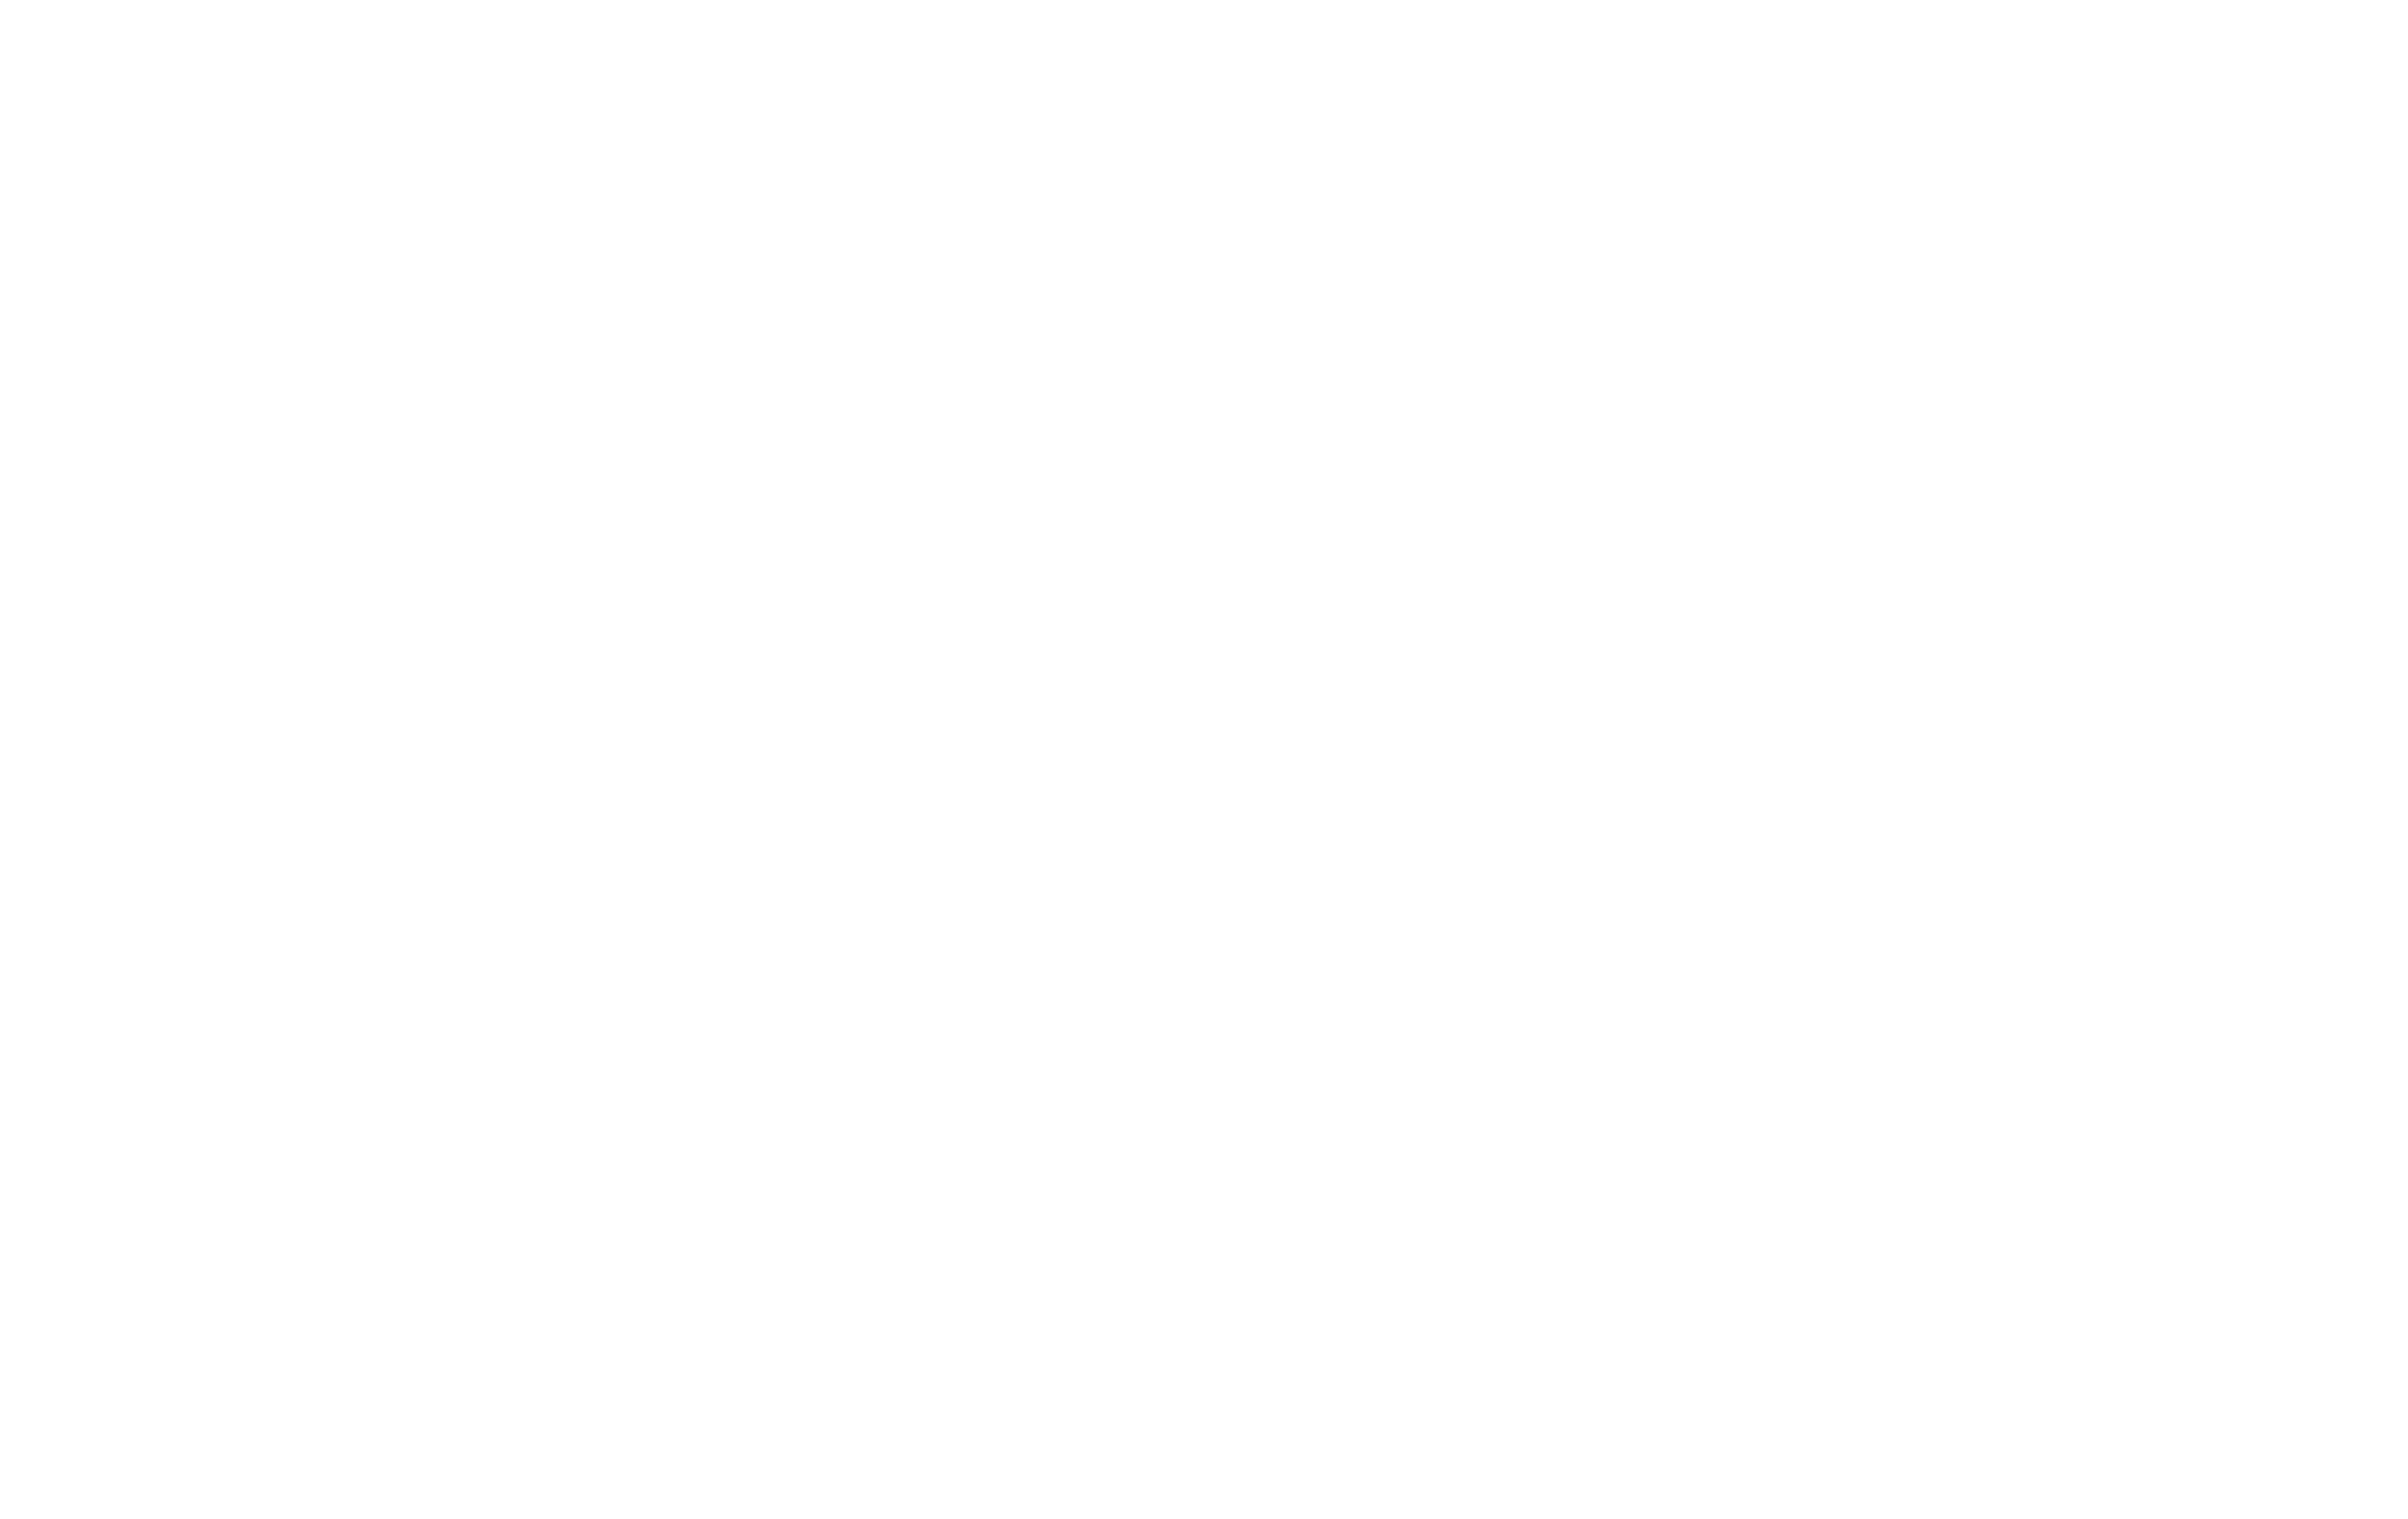 ourstore